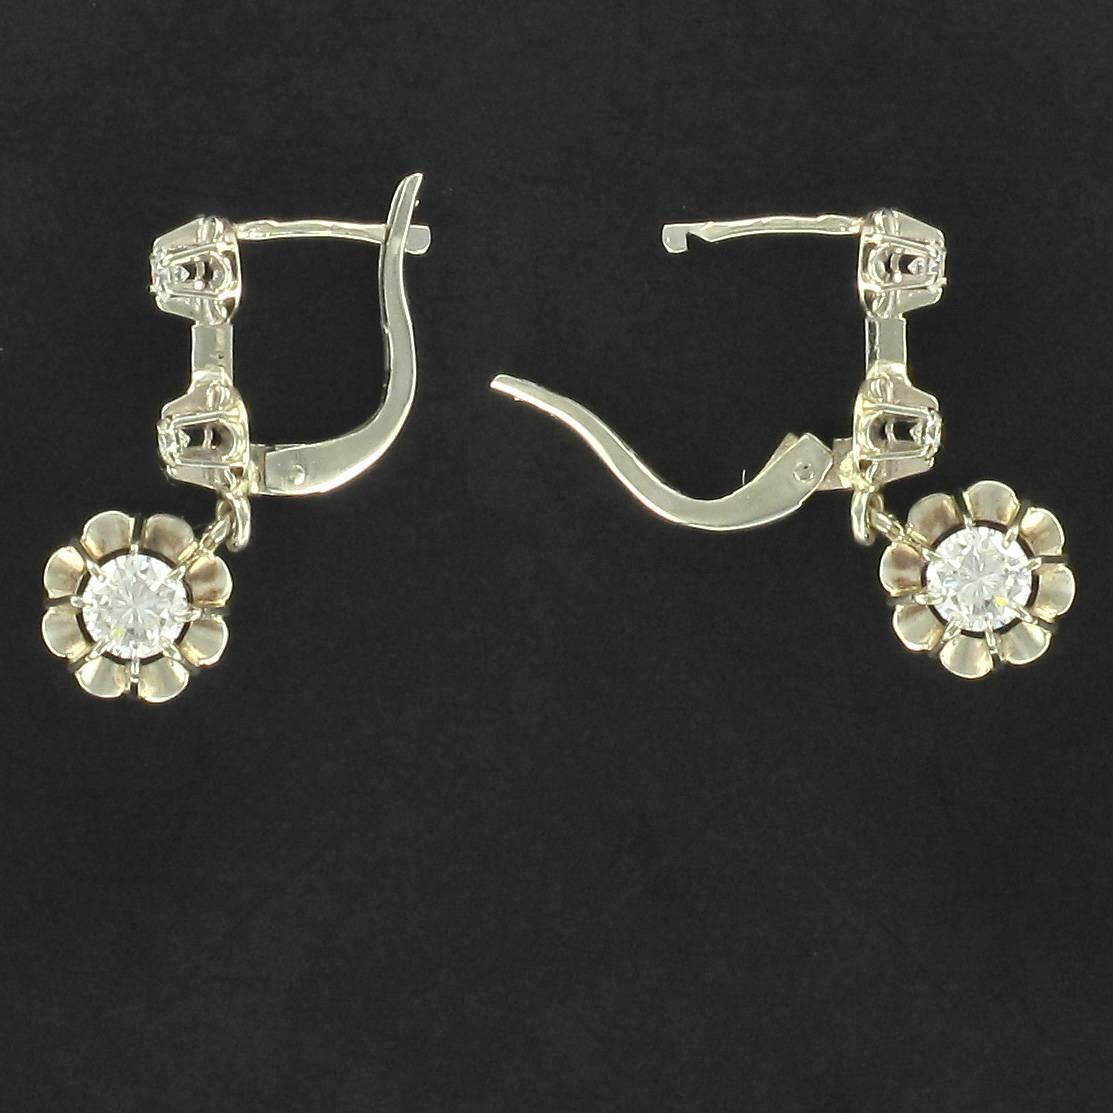 Earrings in 18 carats white gold, eagle head hallmark.
Sublime, each  white gold earring is composed of 3 antique cut diamonds set with claws. The clasp closes at the back. 
Total weight of the 2 most important diamonds: 0.55 carat approximately,